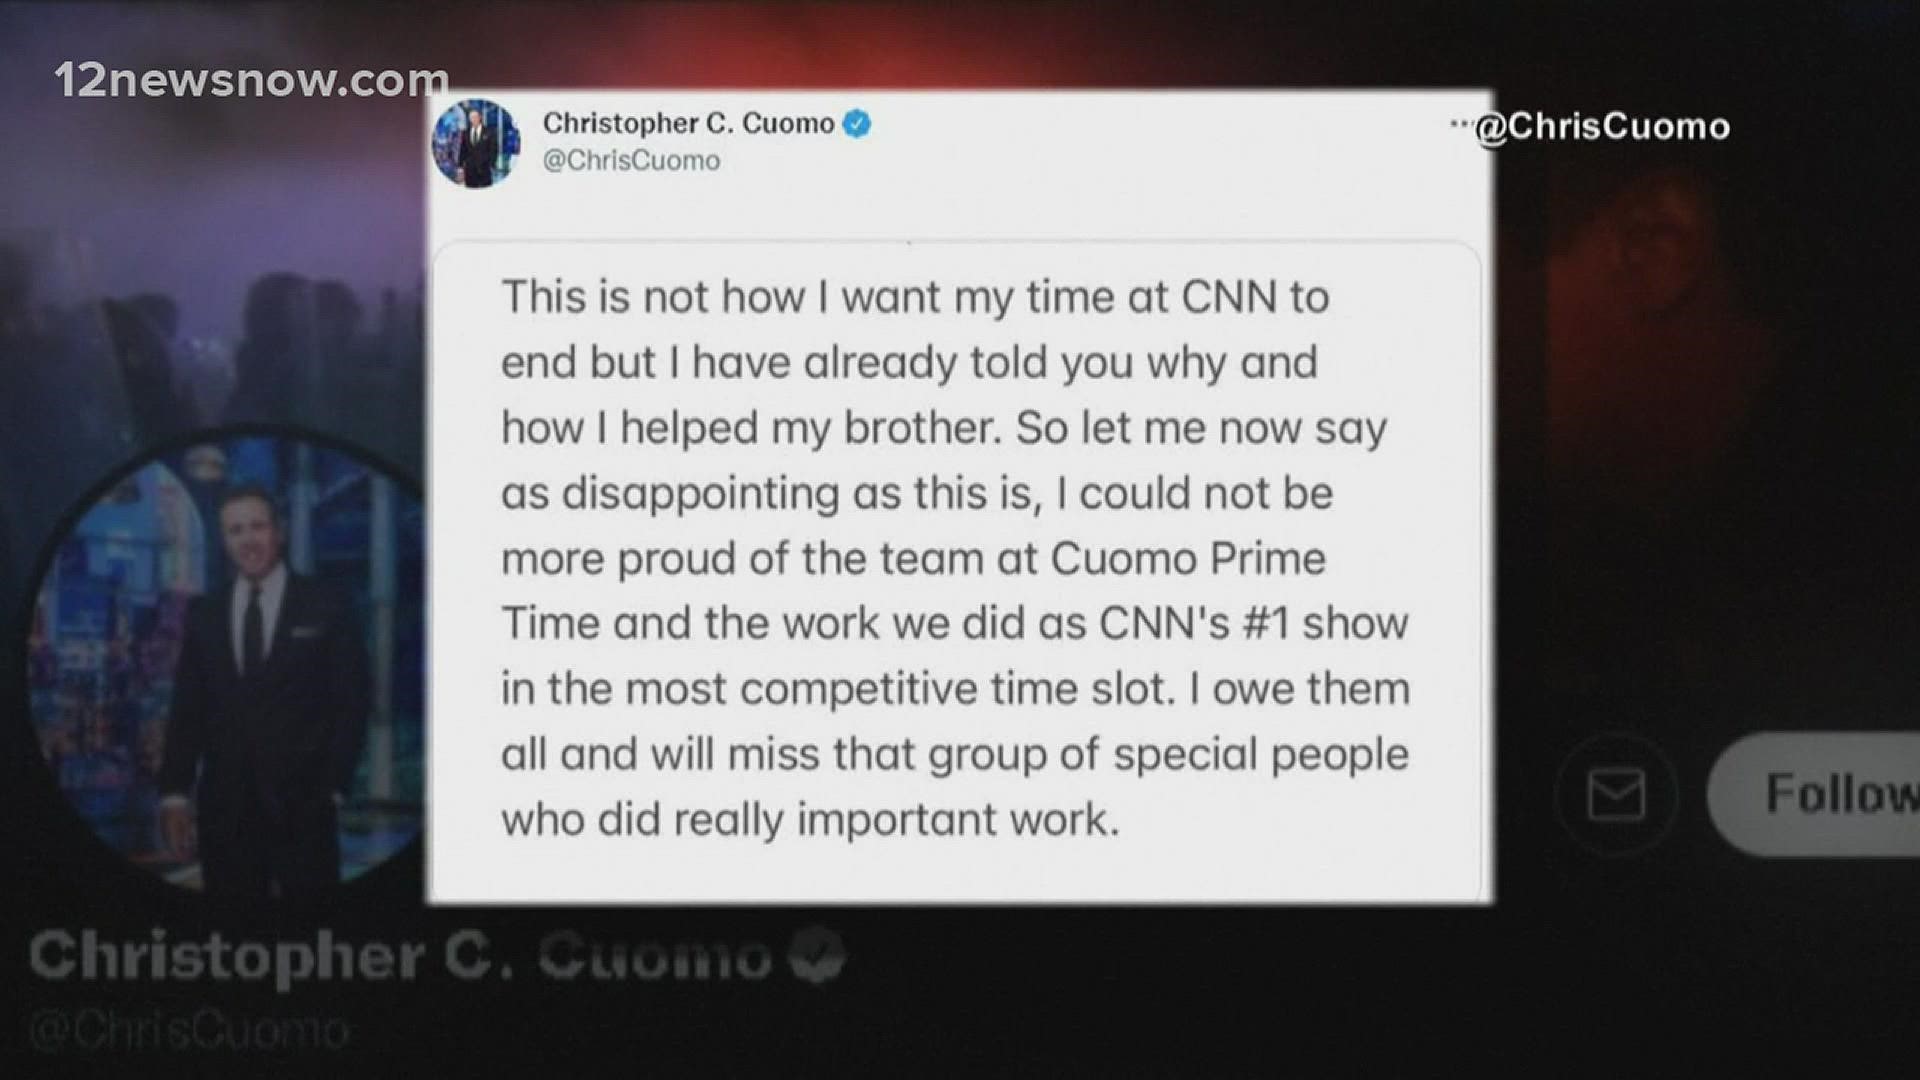 Cuomo released a statement saying this was not how he hoped for things to end for his time at CNN.